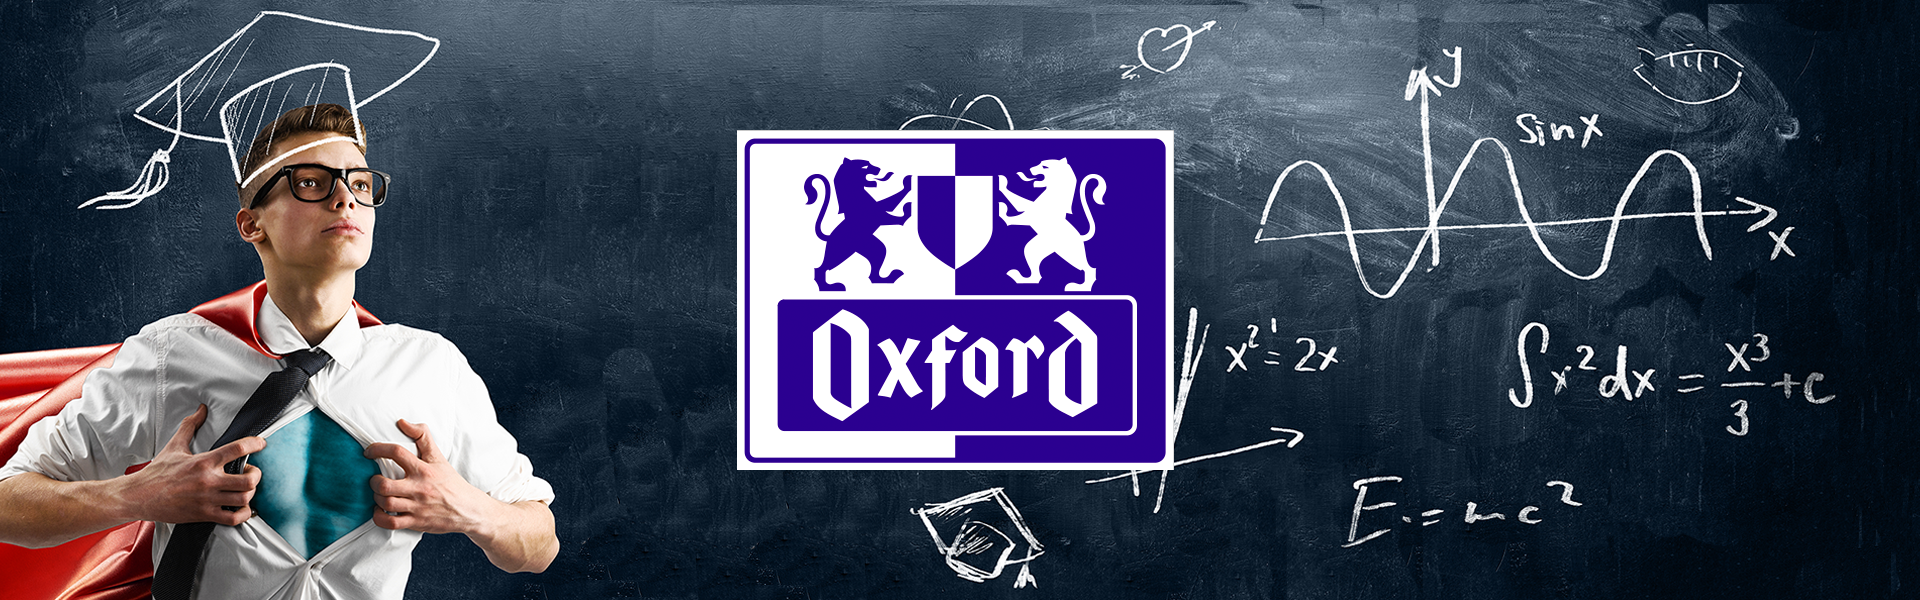 Oxford Brand, Power in Your Hands